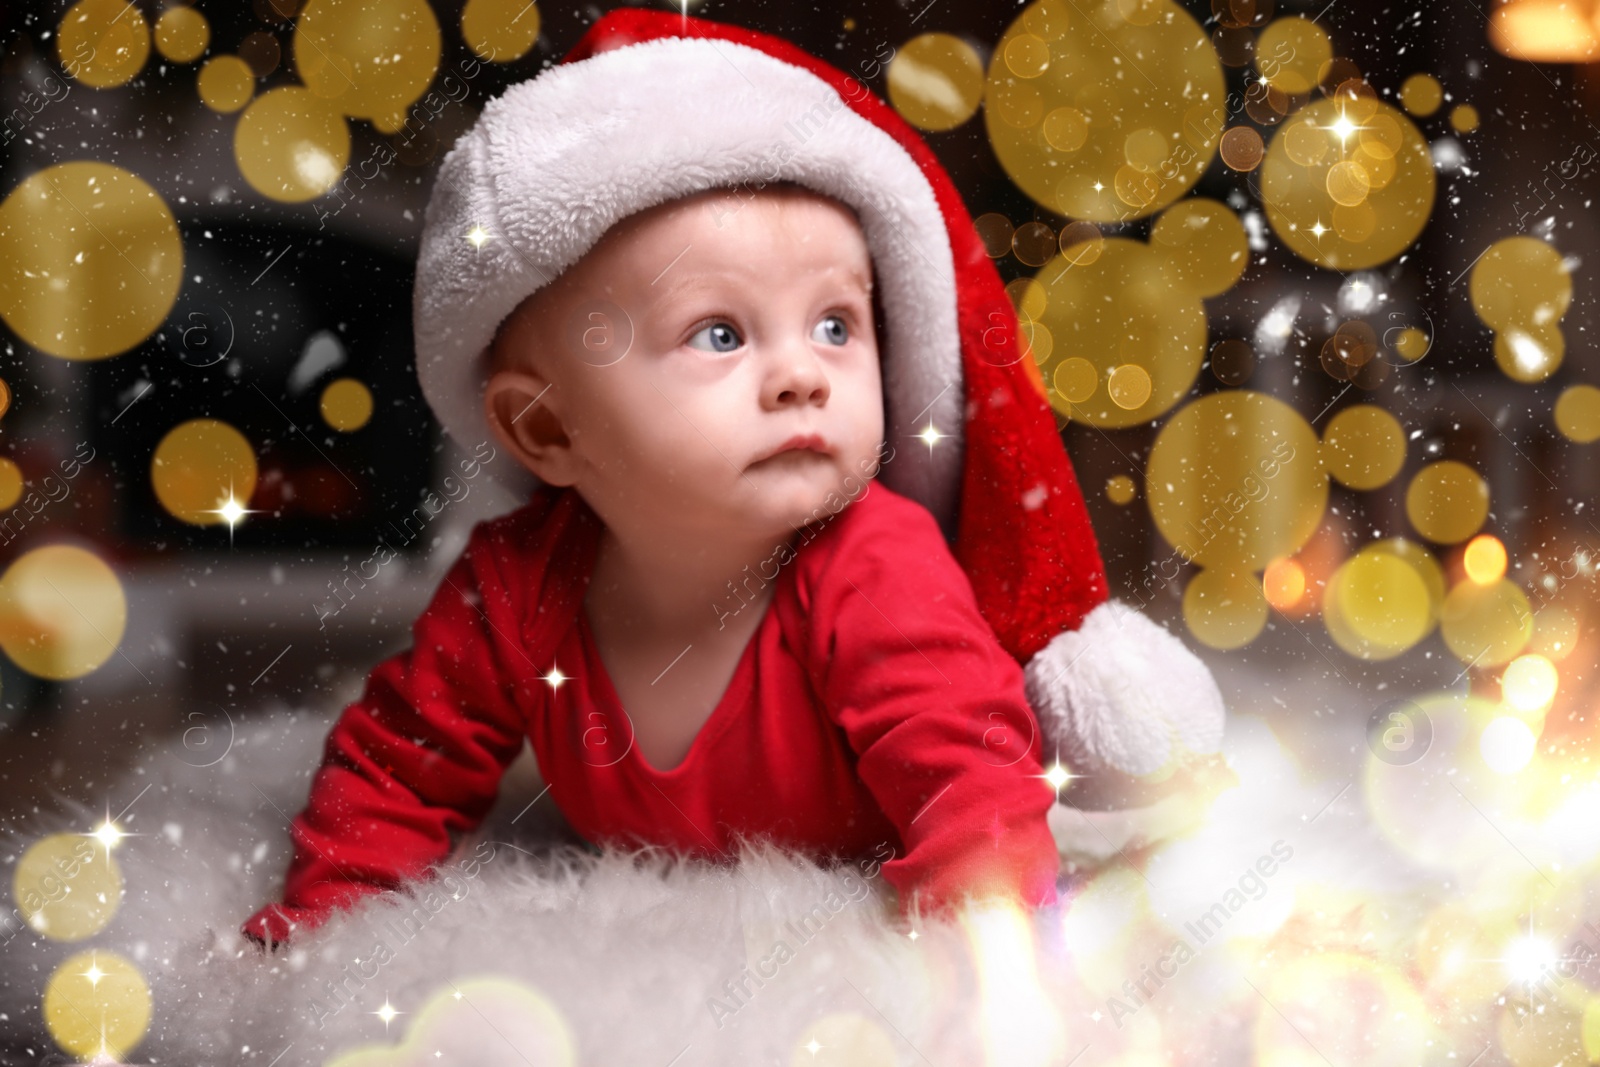 Image of Cute little baby in red pajamas and Santa hat on floor against blurred festive lights. Christmas suit